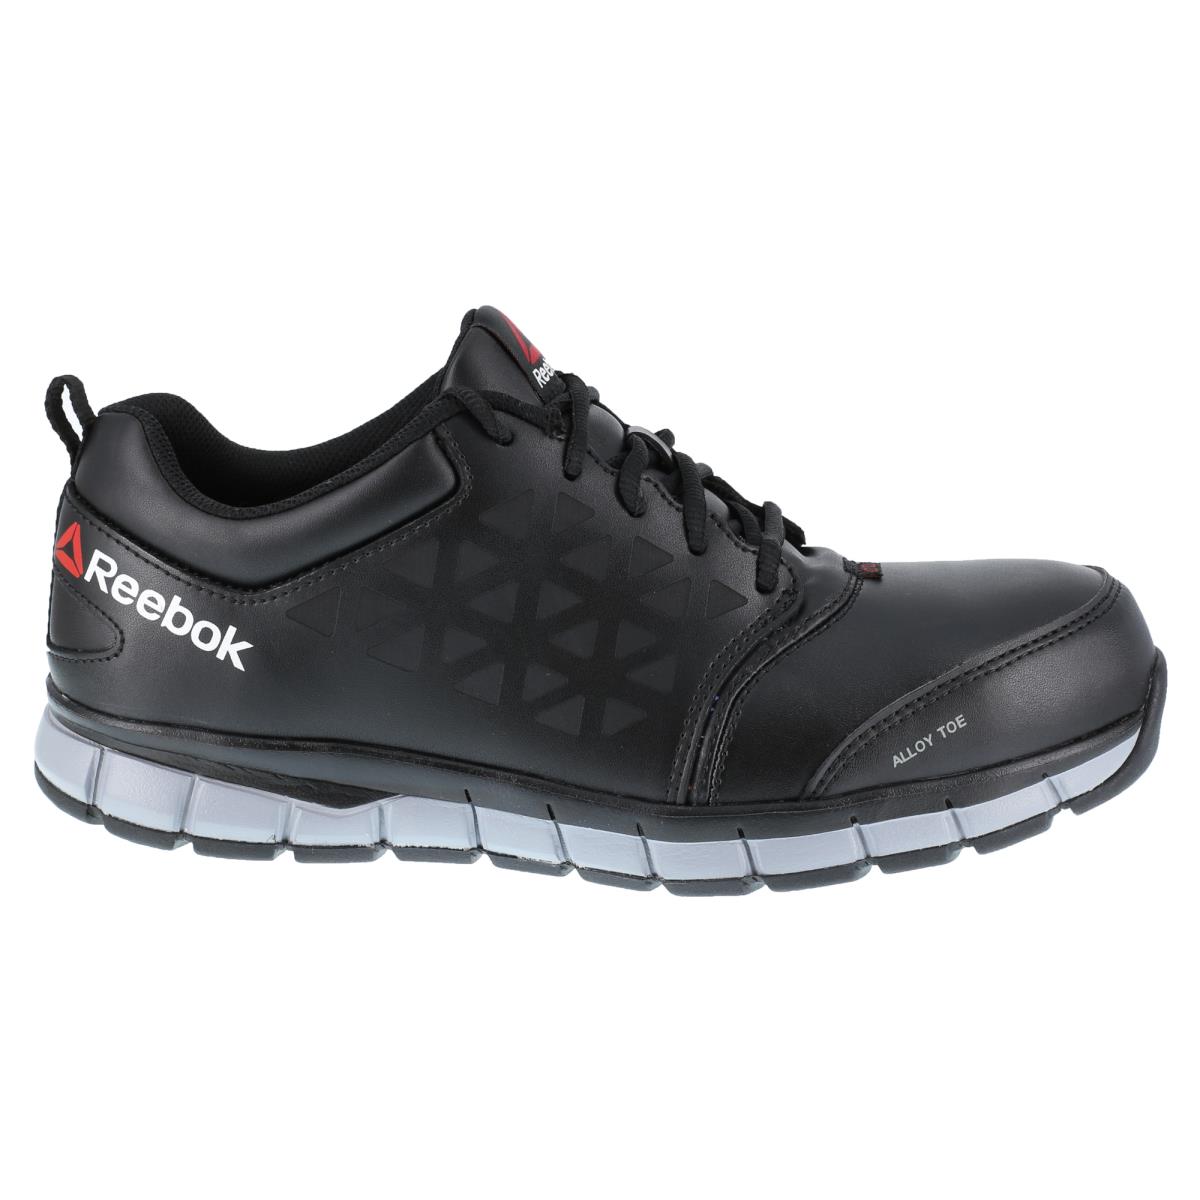 Reebok Mens Black Leather Work Shoes Conductive Athletic AT M